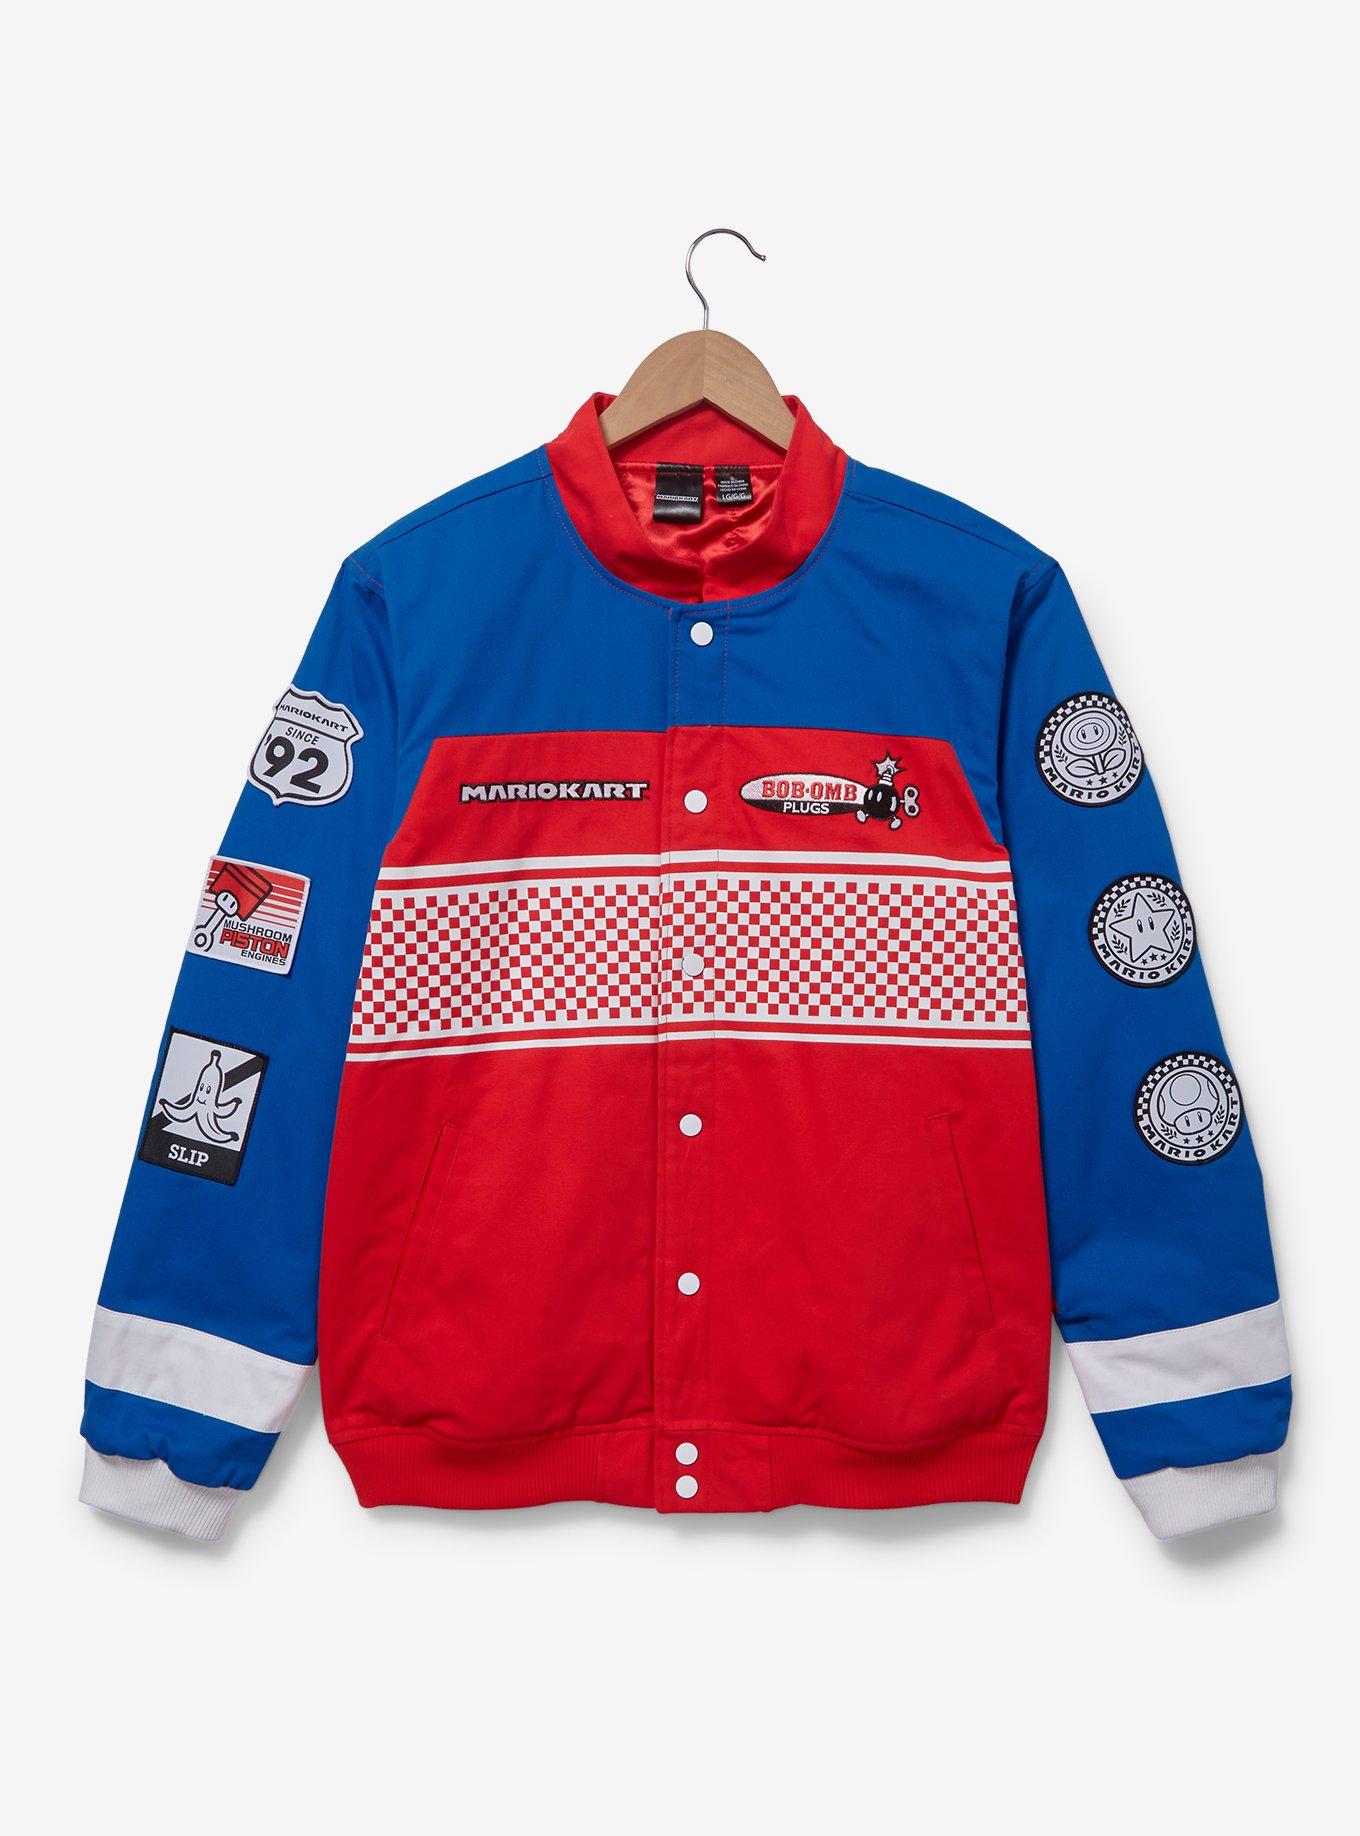 Nintendo Mario Kart Red and Blue Racing Jacket - BoxLunch Exclusive, RED, hi-res